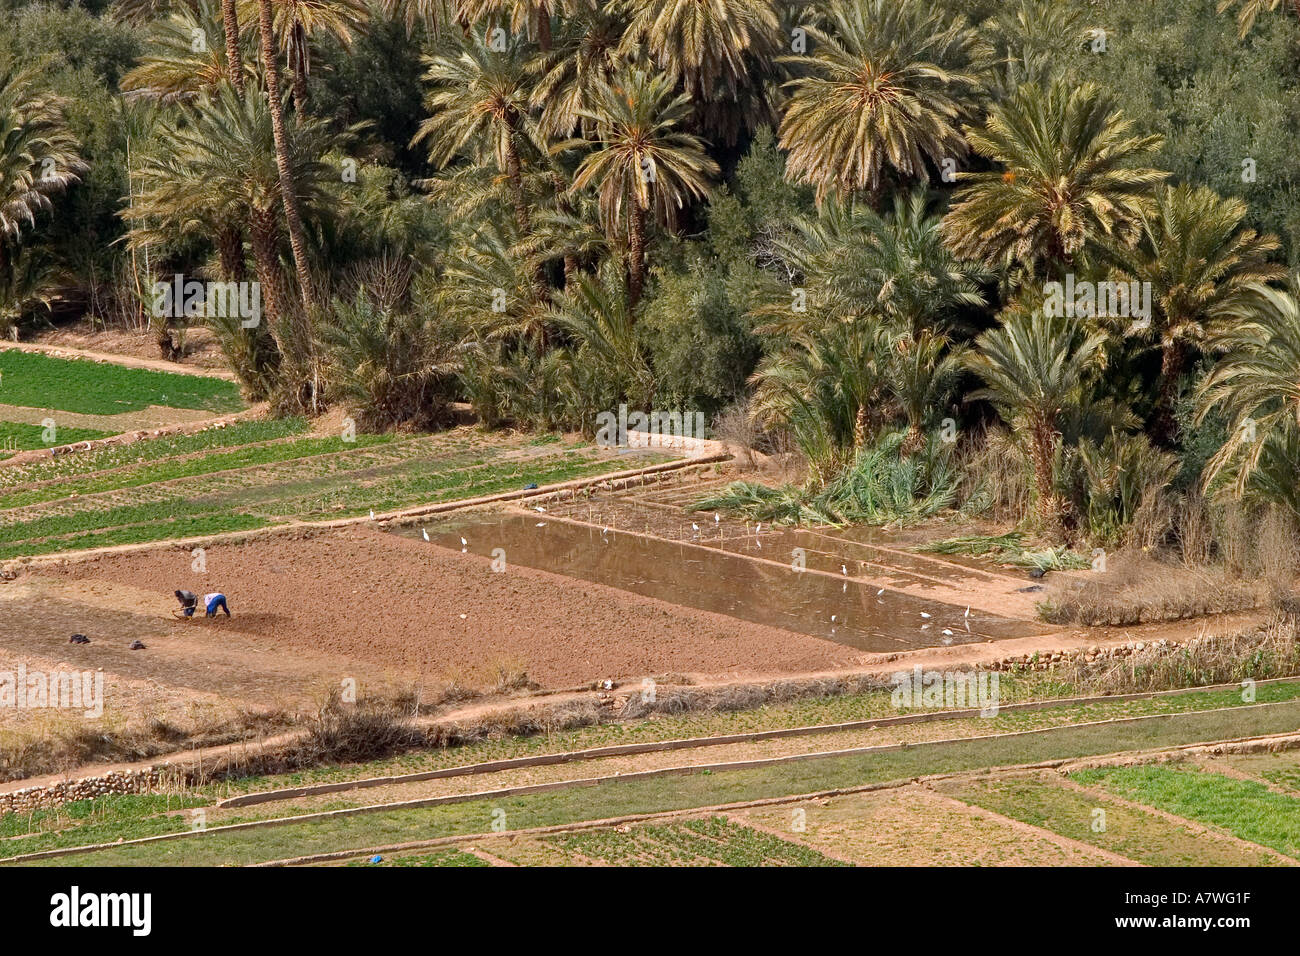 Bird s eye view of two men working the fields on the edge of a palm grove Todra valley Morocco Stock Photo